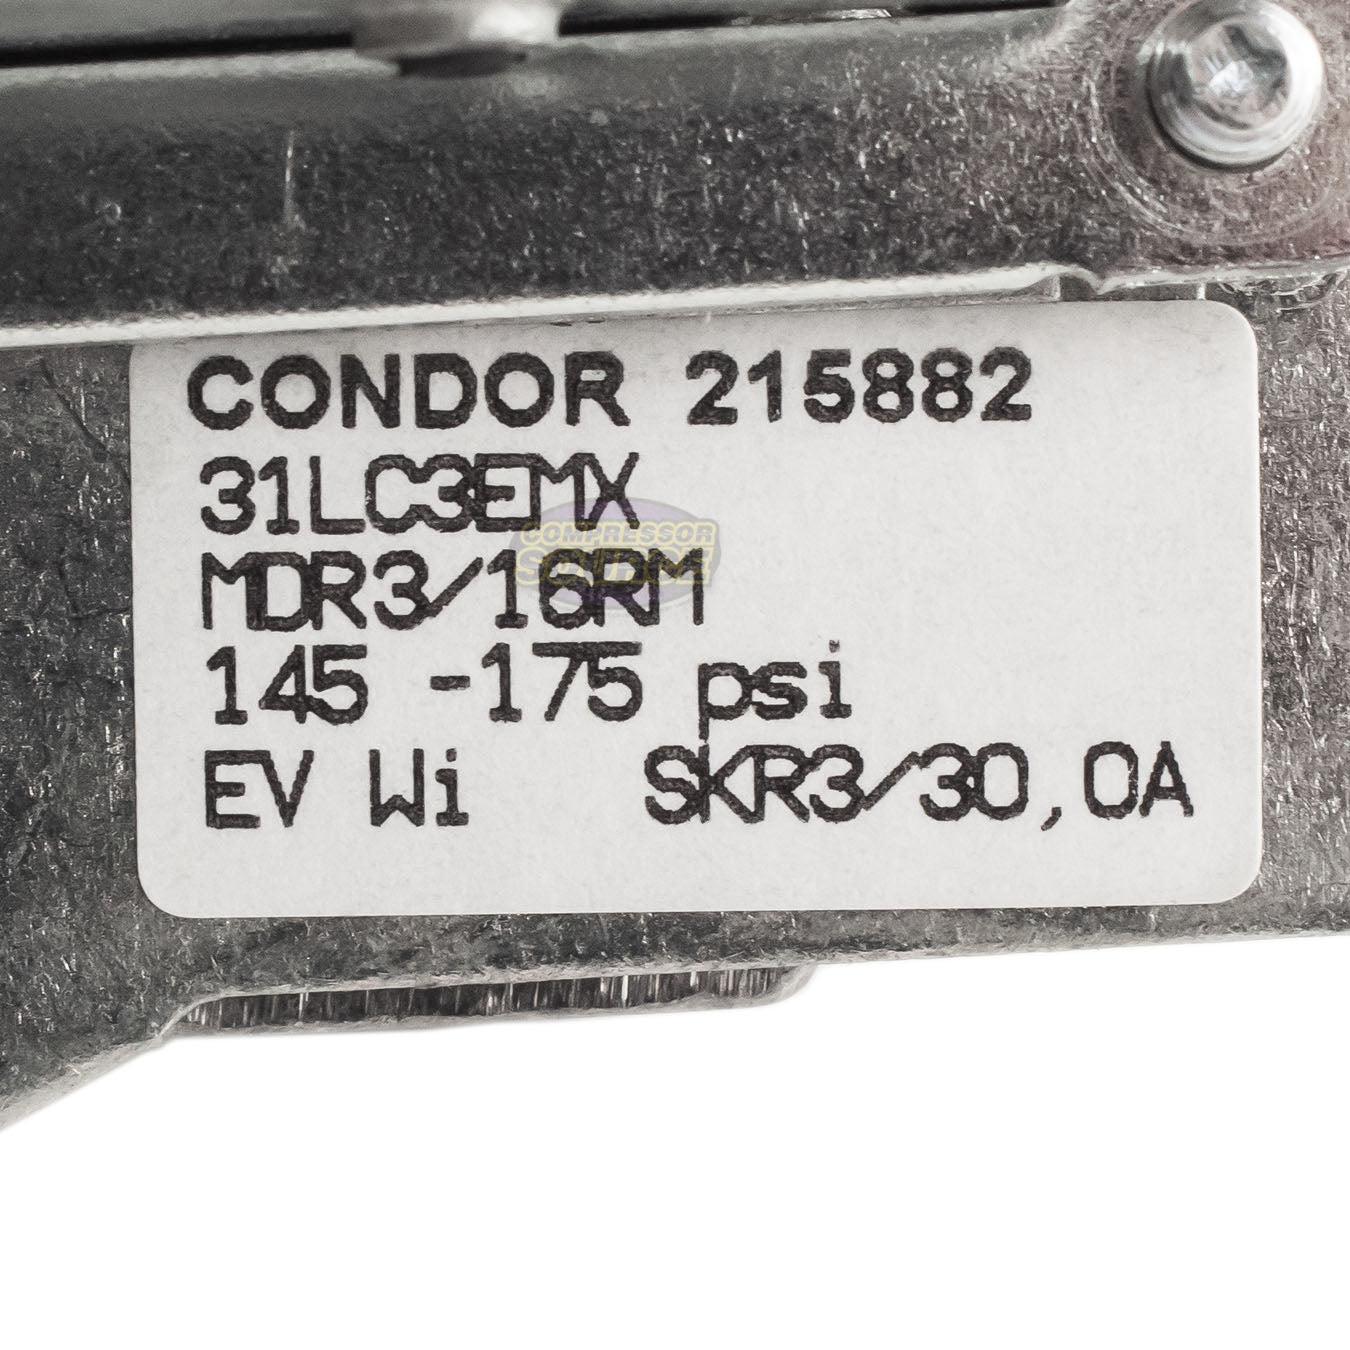 Condor MDR3/16RM 145-175 PSI 4 Port Pressure Switch 22A - 30A Overload 1/4" FNPT